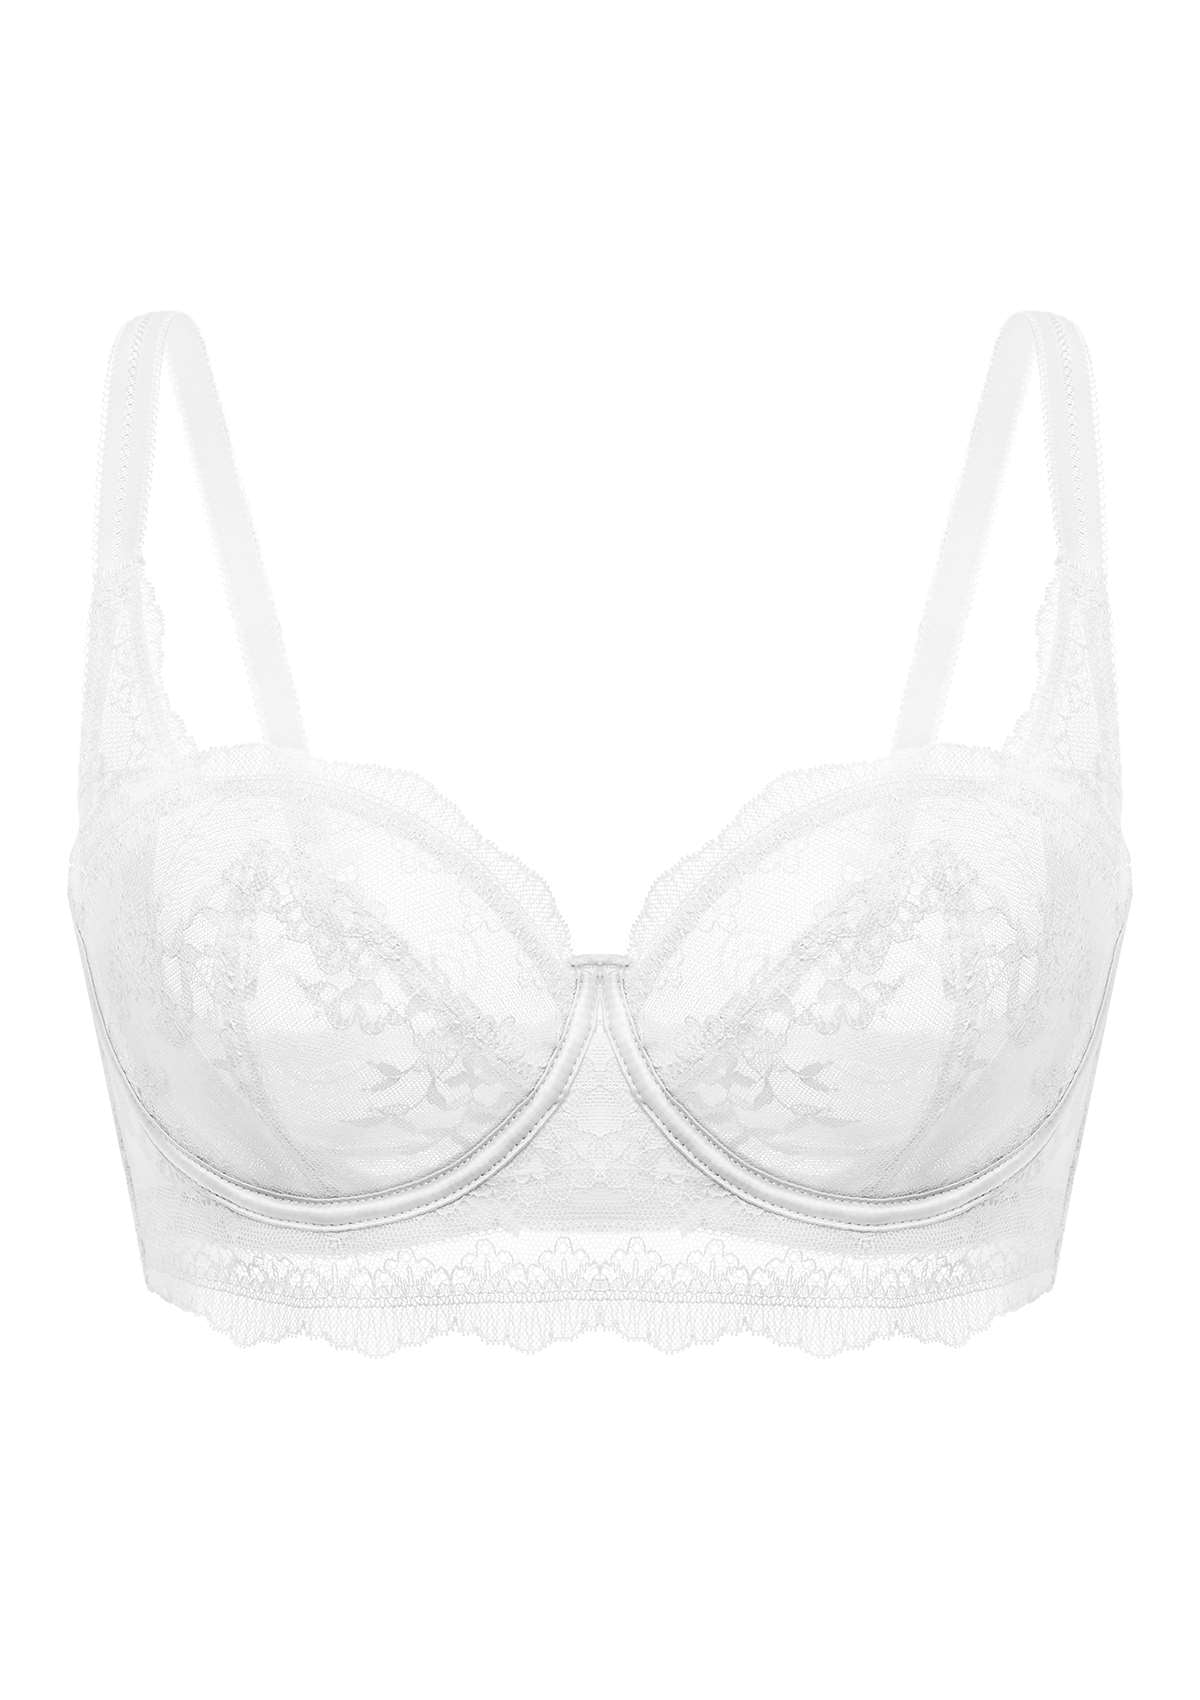 HSIA I Do Floral Lace Bridal Balconette Beautiful Bra For Special Day - Pink / 34 / DD/E